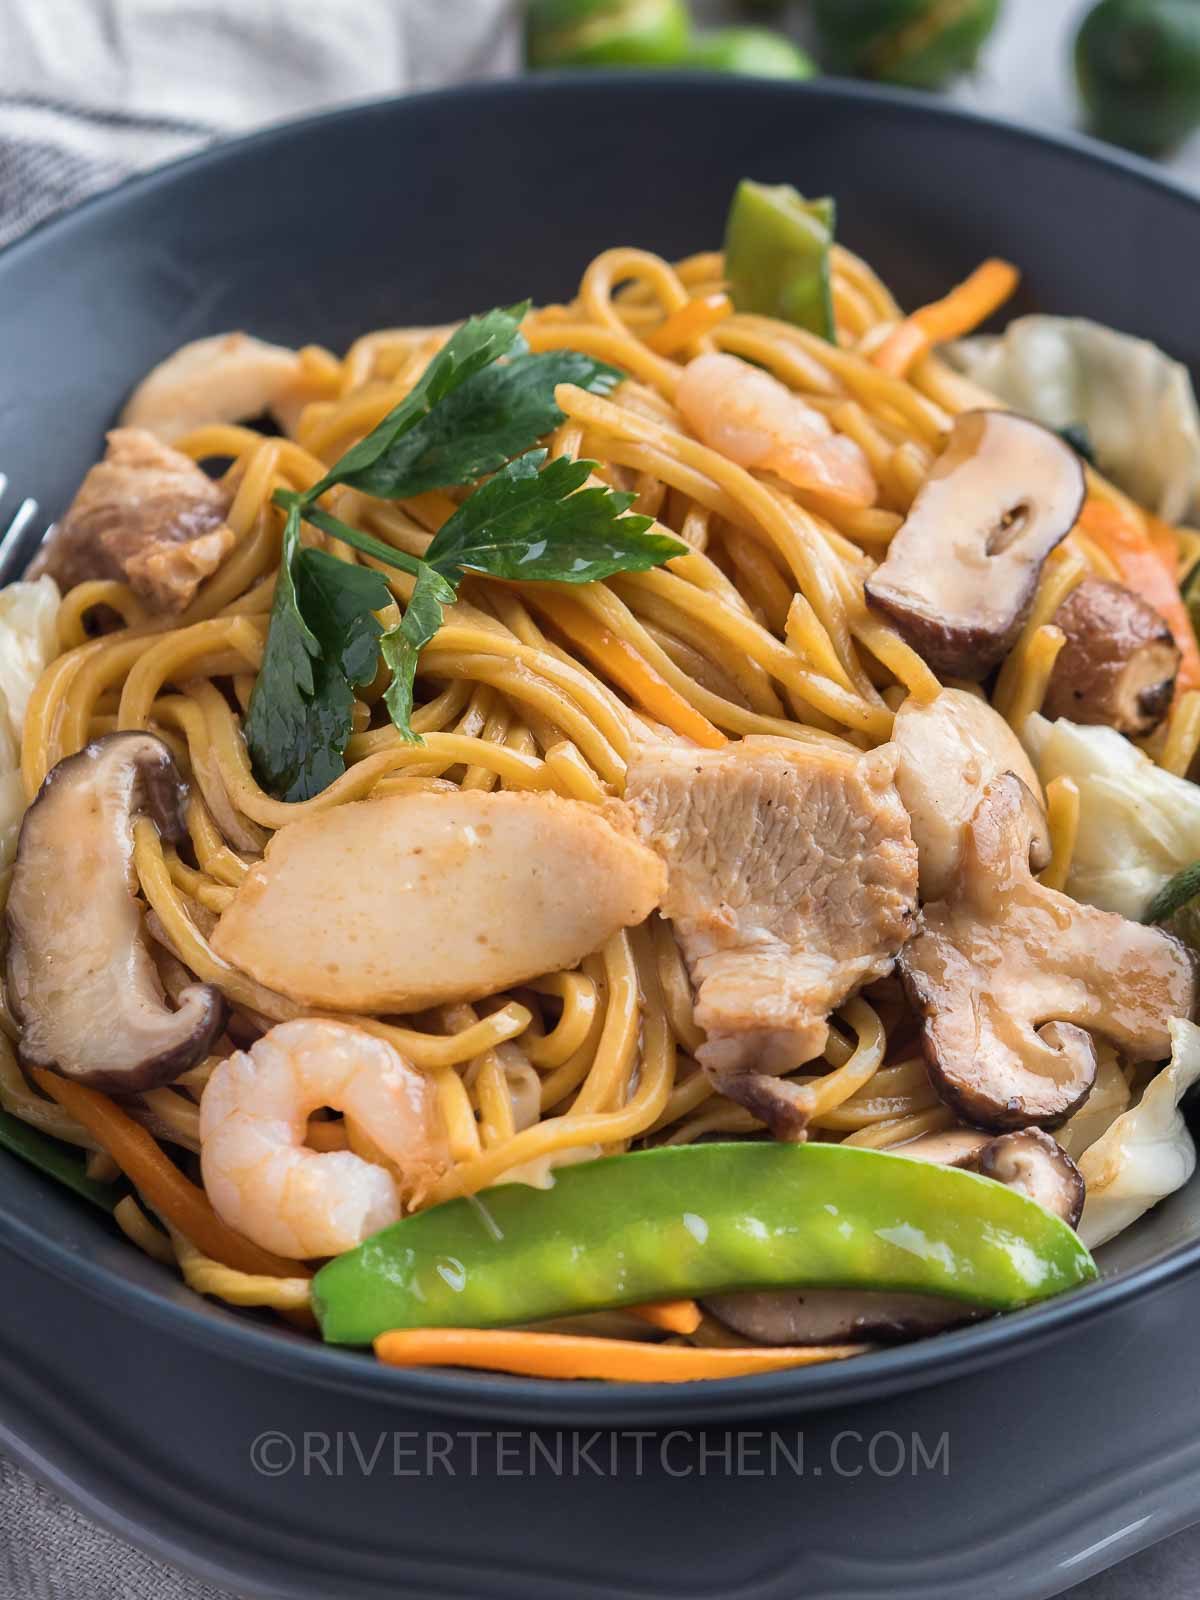 Filipino stir-fried yellow noodles with vegetables